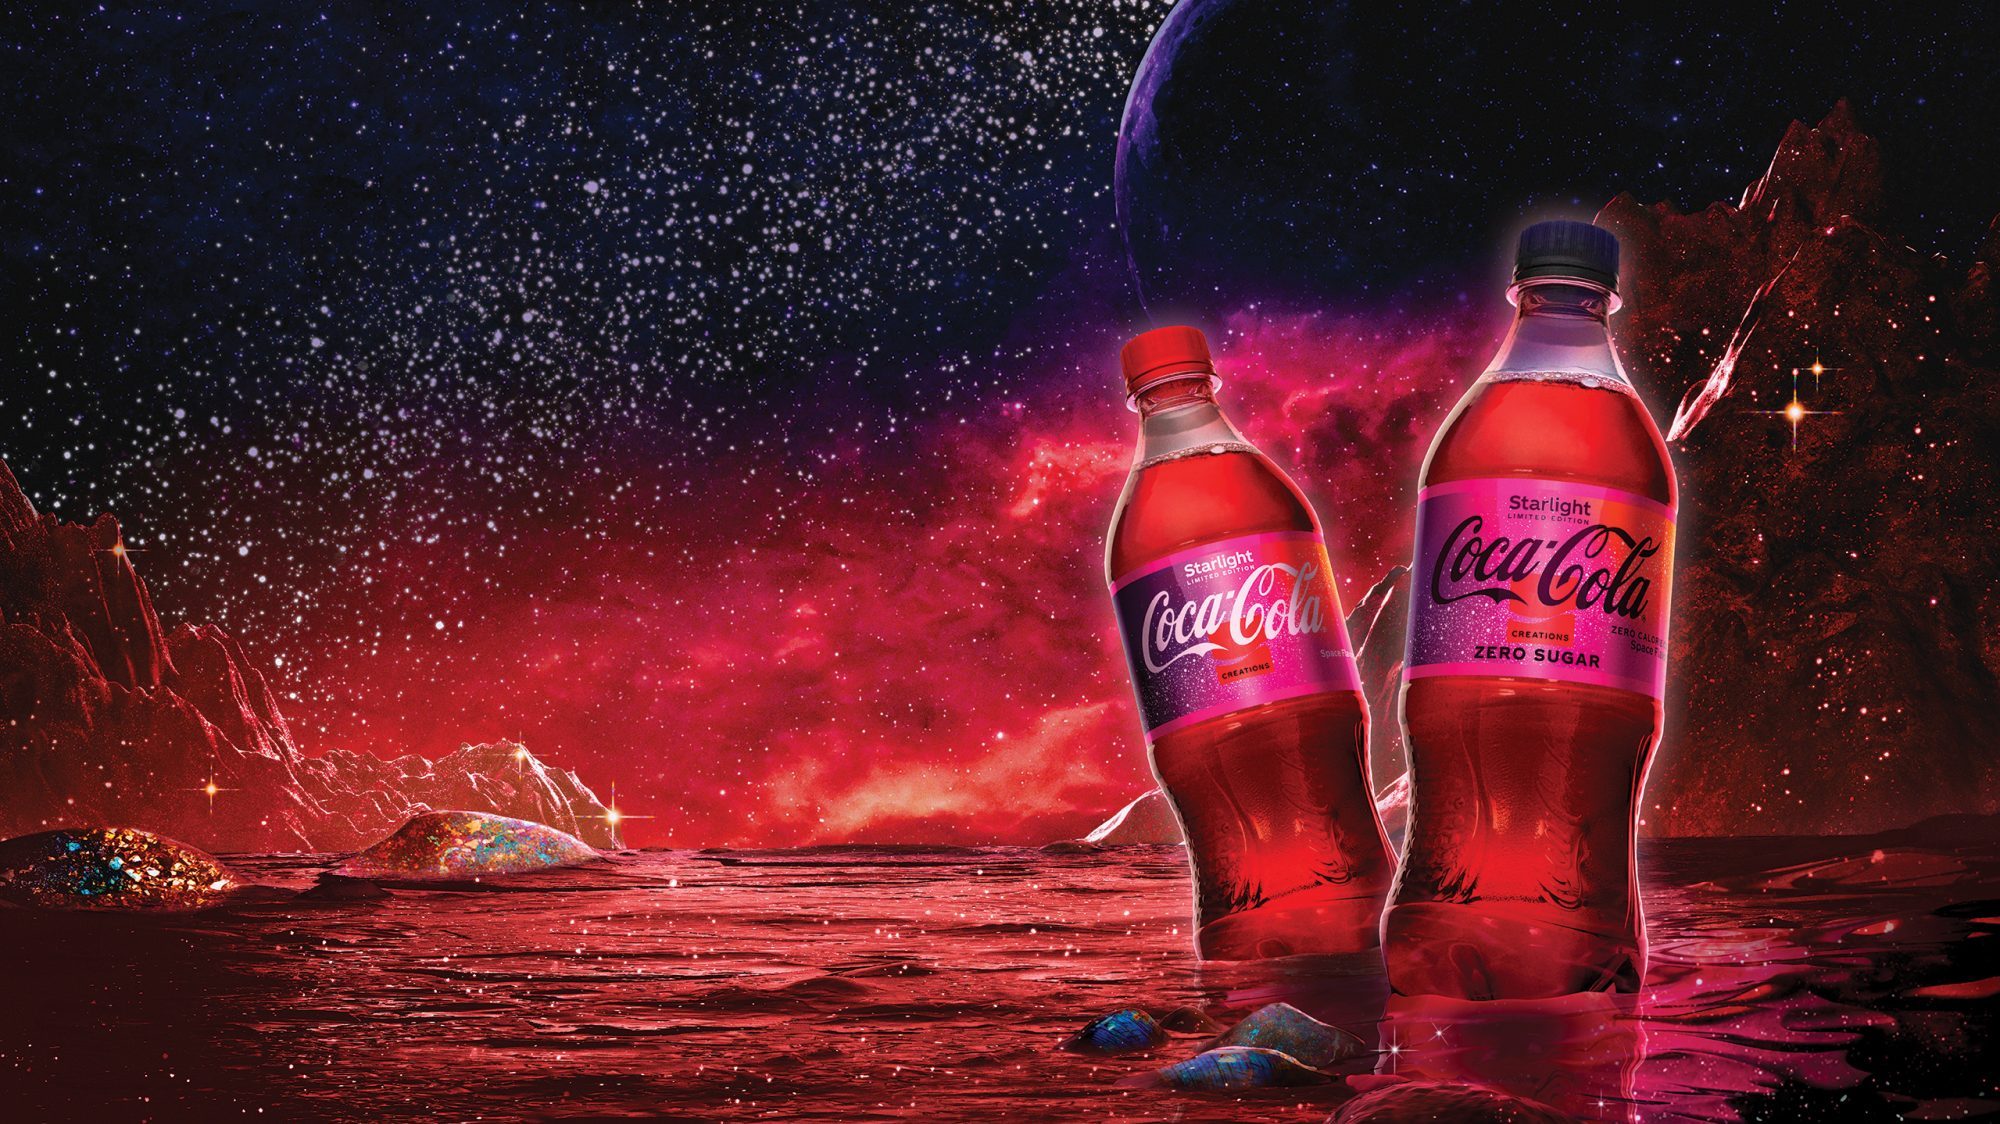 Coca-Cola Launches Starlight, a New-to-Earth 'Space-Flavored